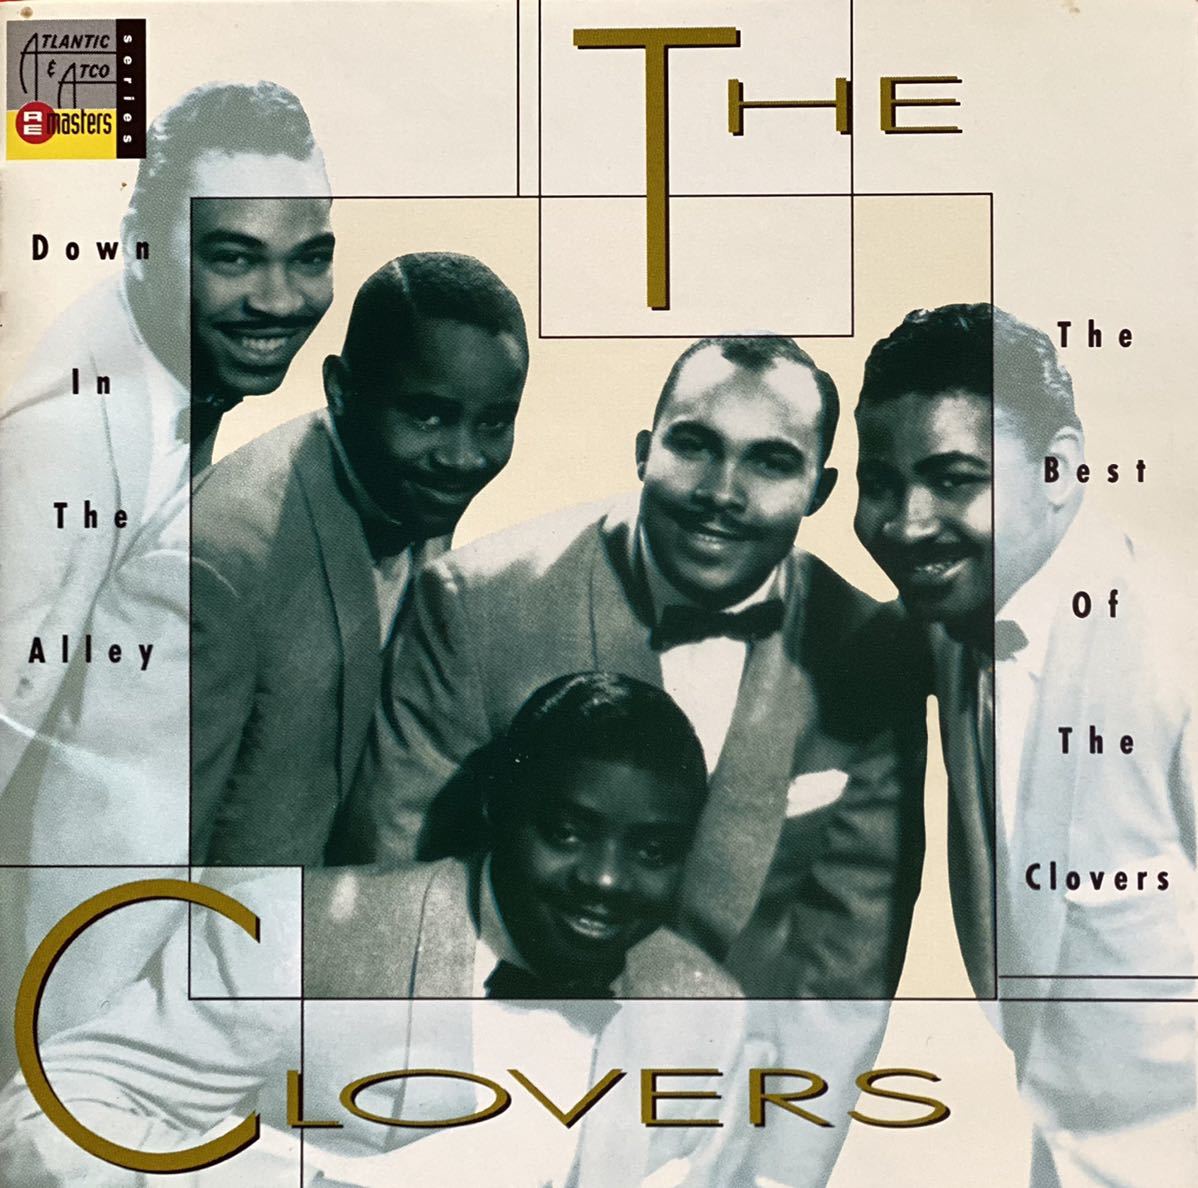 【CD】クローヴァーズ 「The Clovers Down In The Alley: The Best Of The Clovers」国内盤 BLUE VELVET 山下達郎_画像1